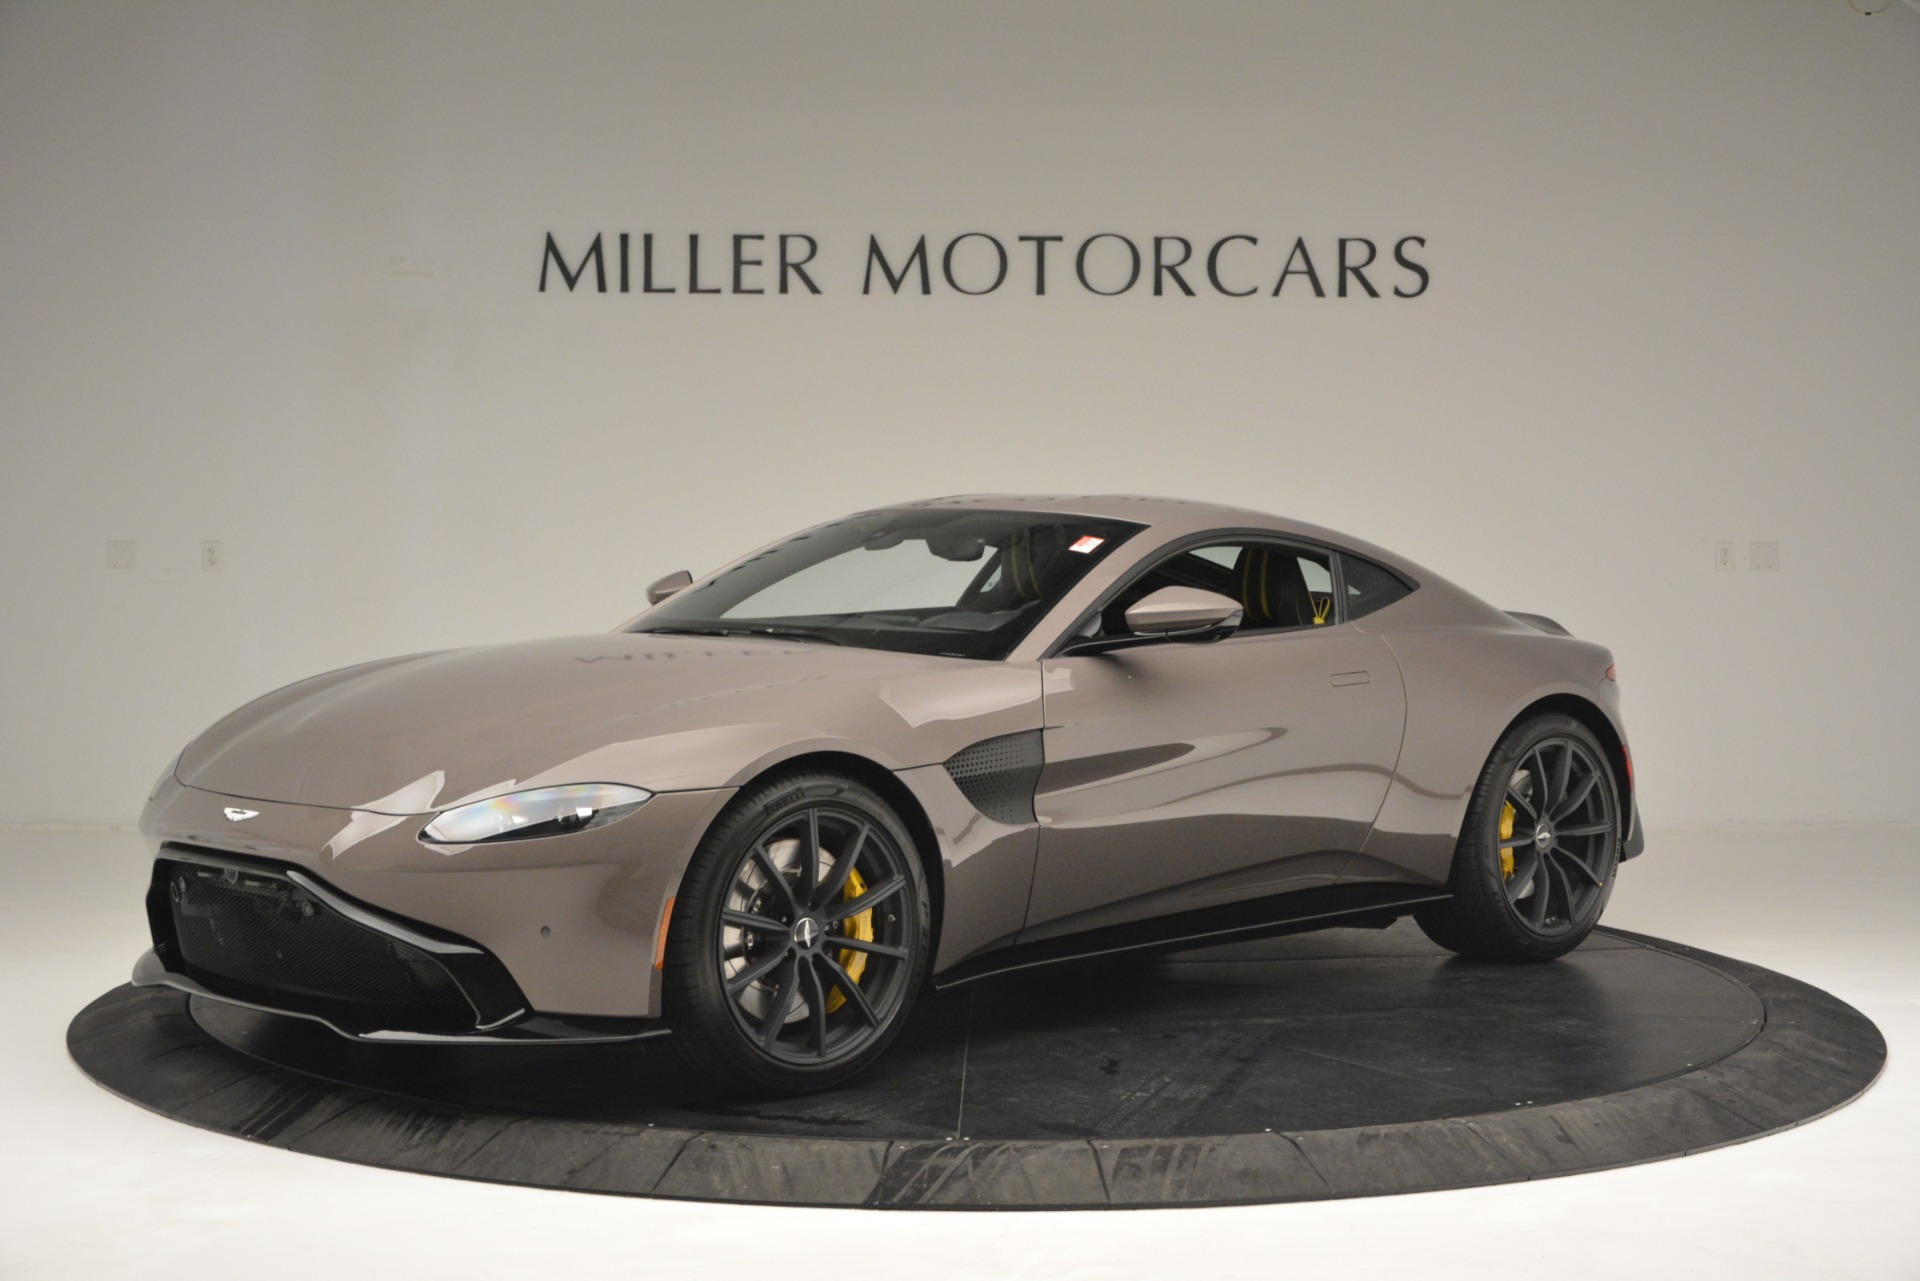 Used 2019 Aston Martin Vantage Coupe for sale Sold at McLaren Greenwich in Greenwich CT 06830 1